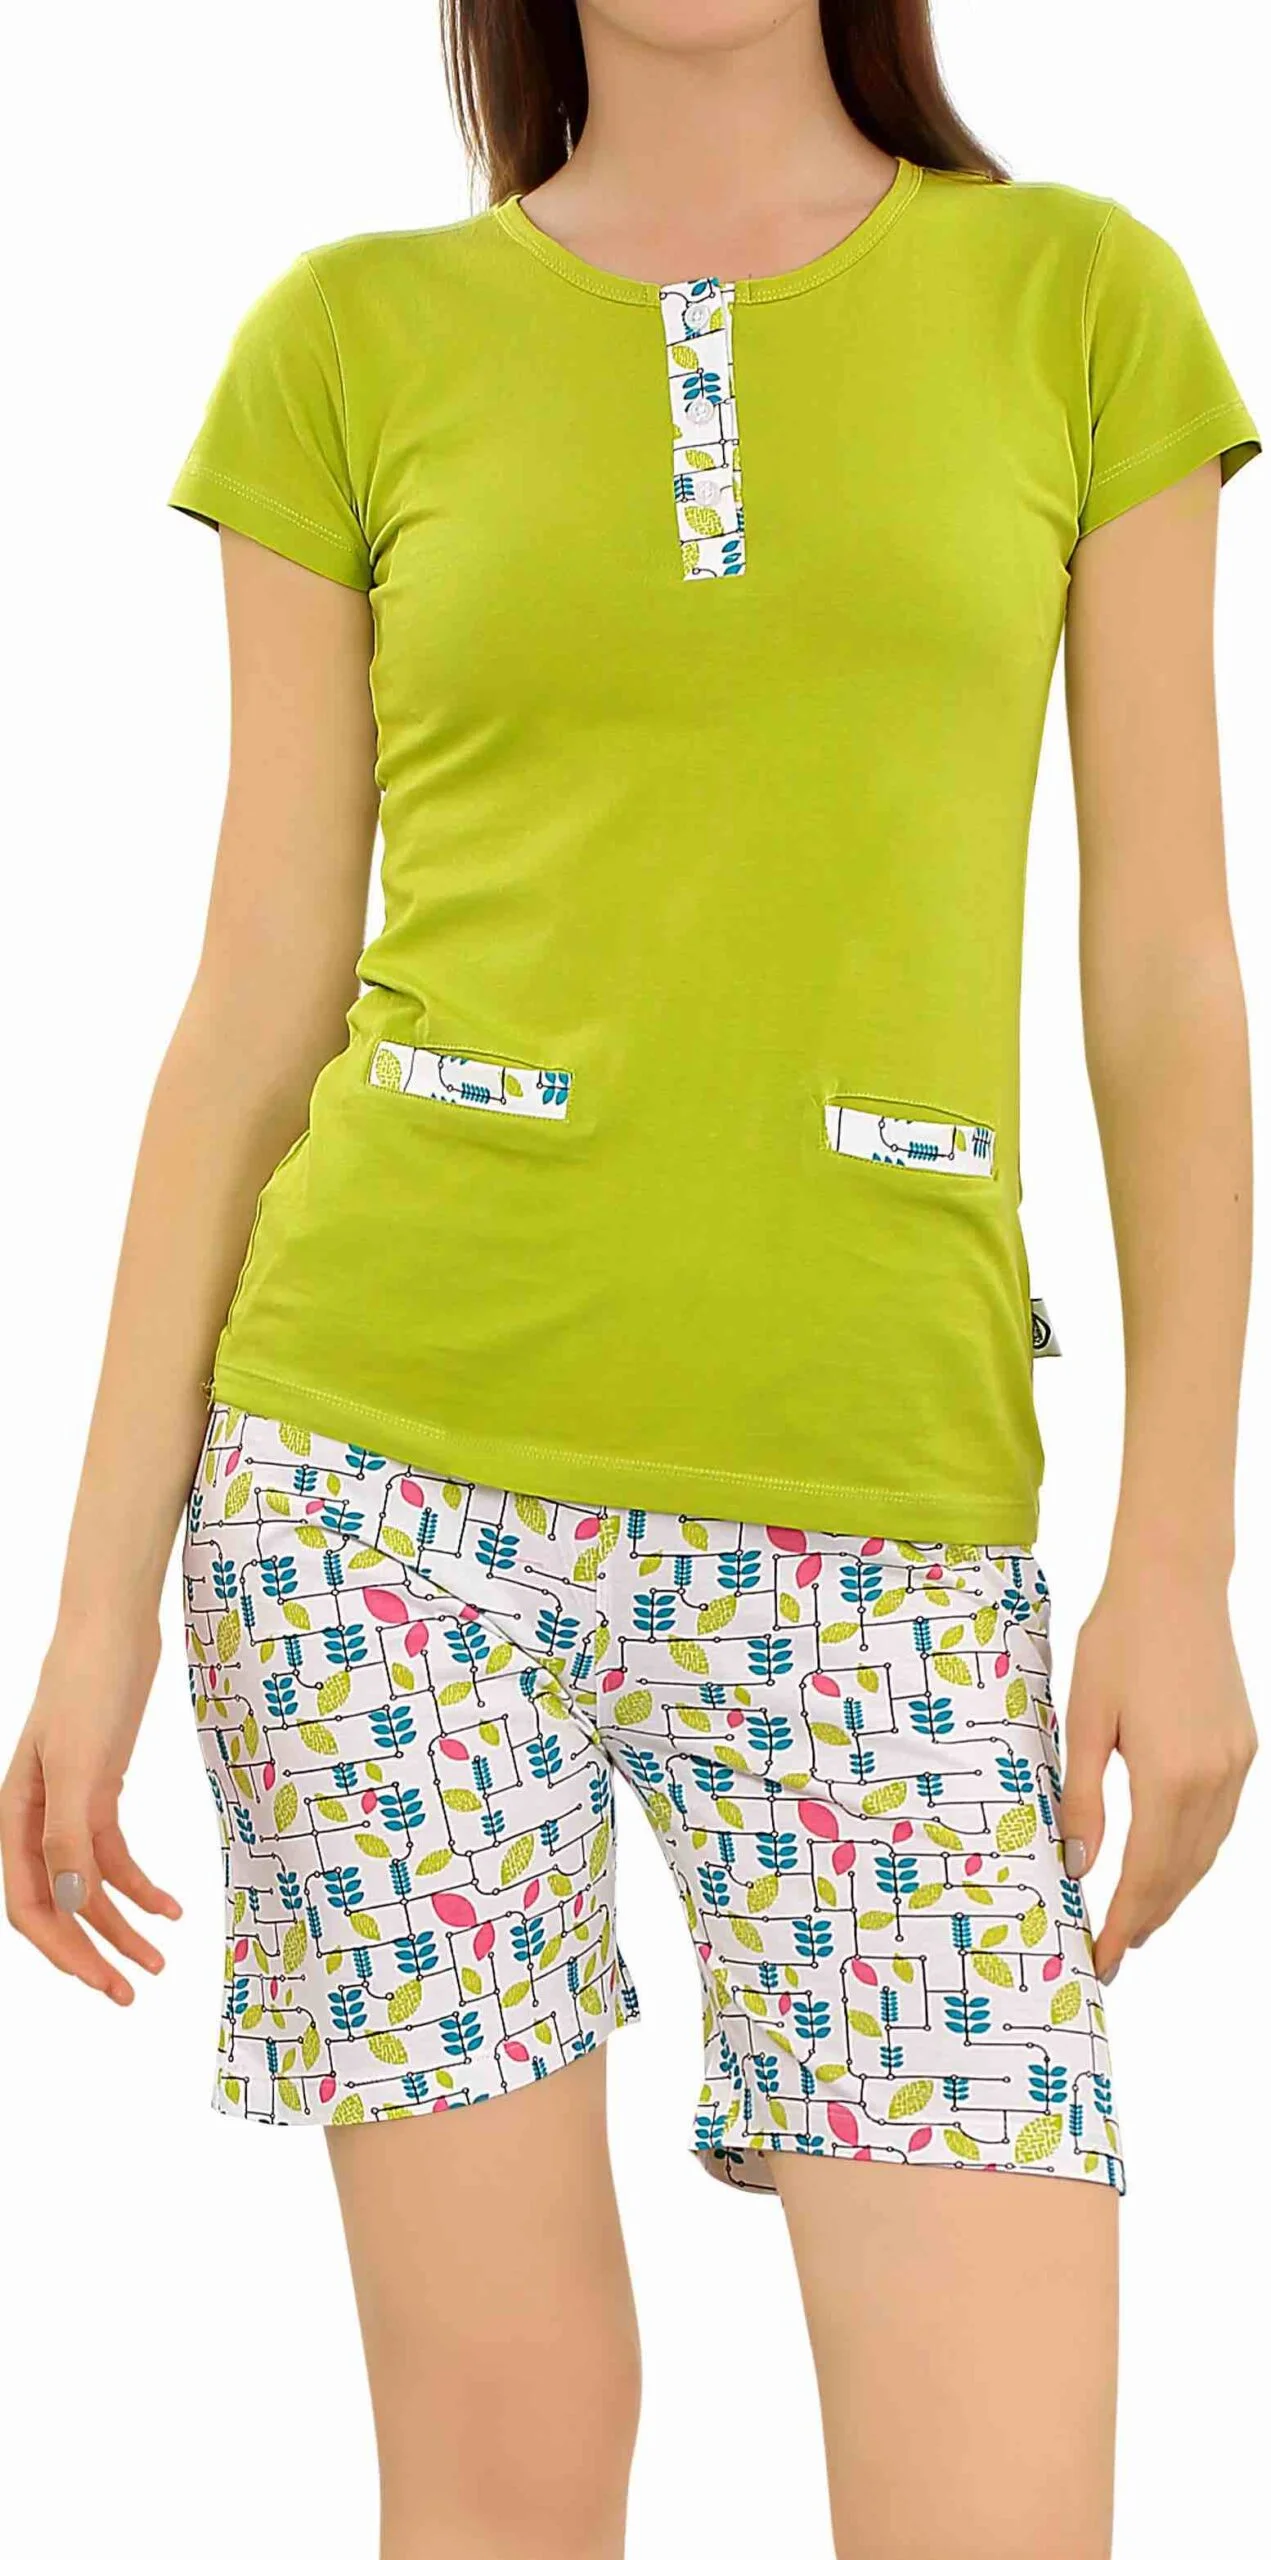 Wholesale Women Cotton Printed Top And Shorts Set Manufacturer Supplier In Bangladesh